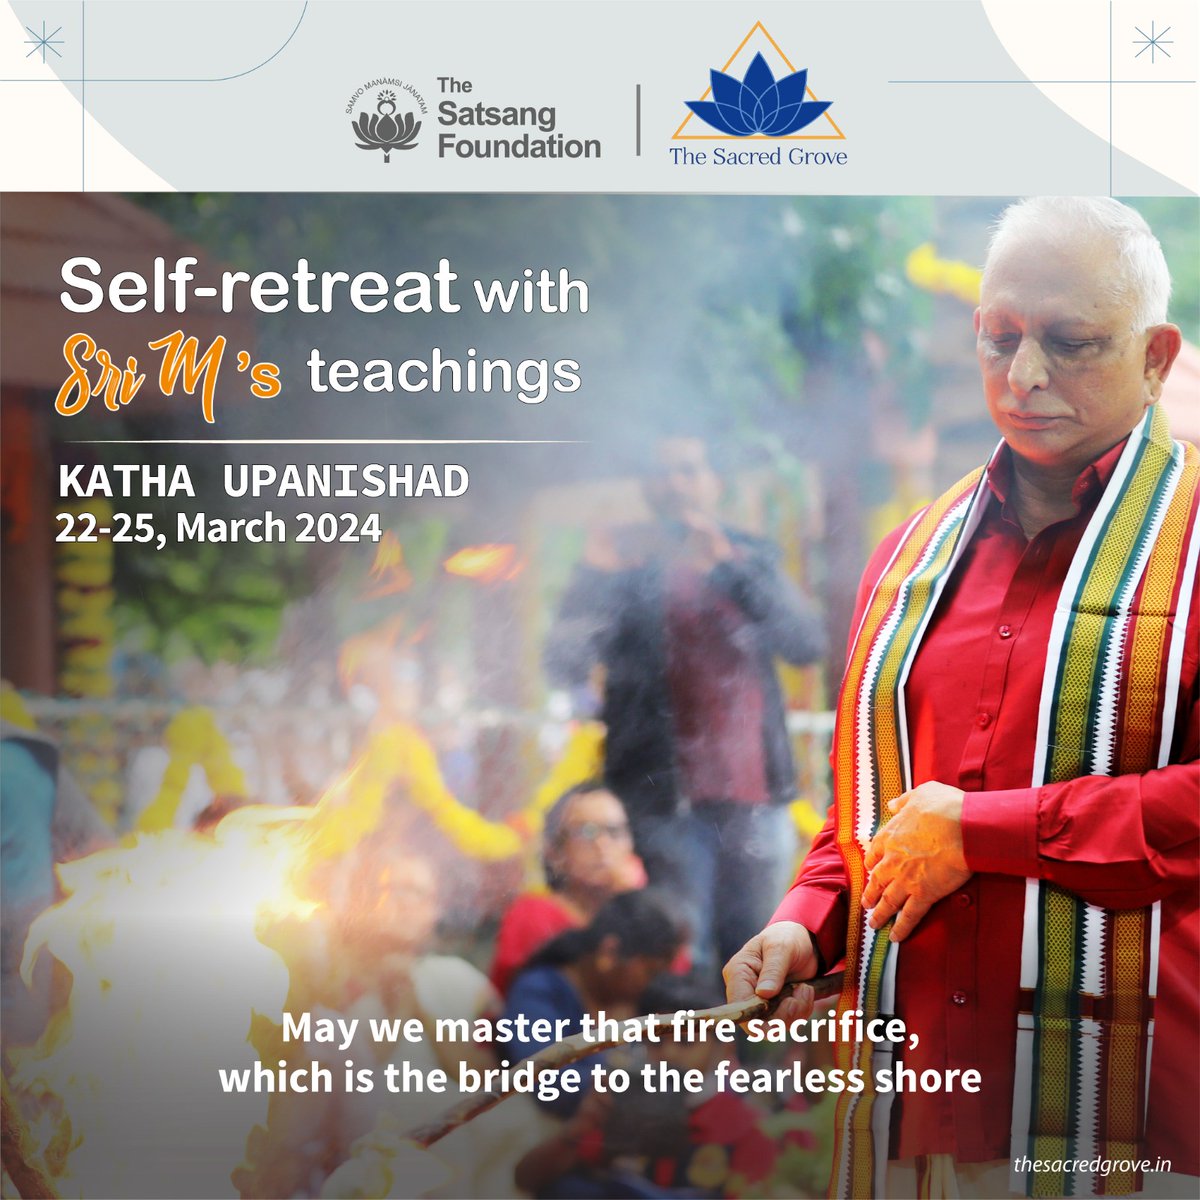 Join us for a 3-day residential self-retreat on Katha Upanishad from 22nd to 25th March at The Sacred Grove. Register at thesacredgrove.in/self-retreat.
#TheSacredGrove  #TheSatsangFoundation #SelfRetreat #AncientWisdom #CentreForExploringConsciousness